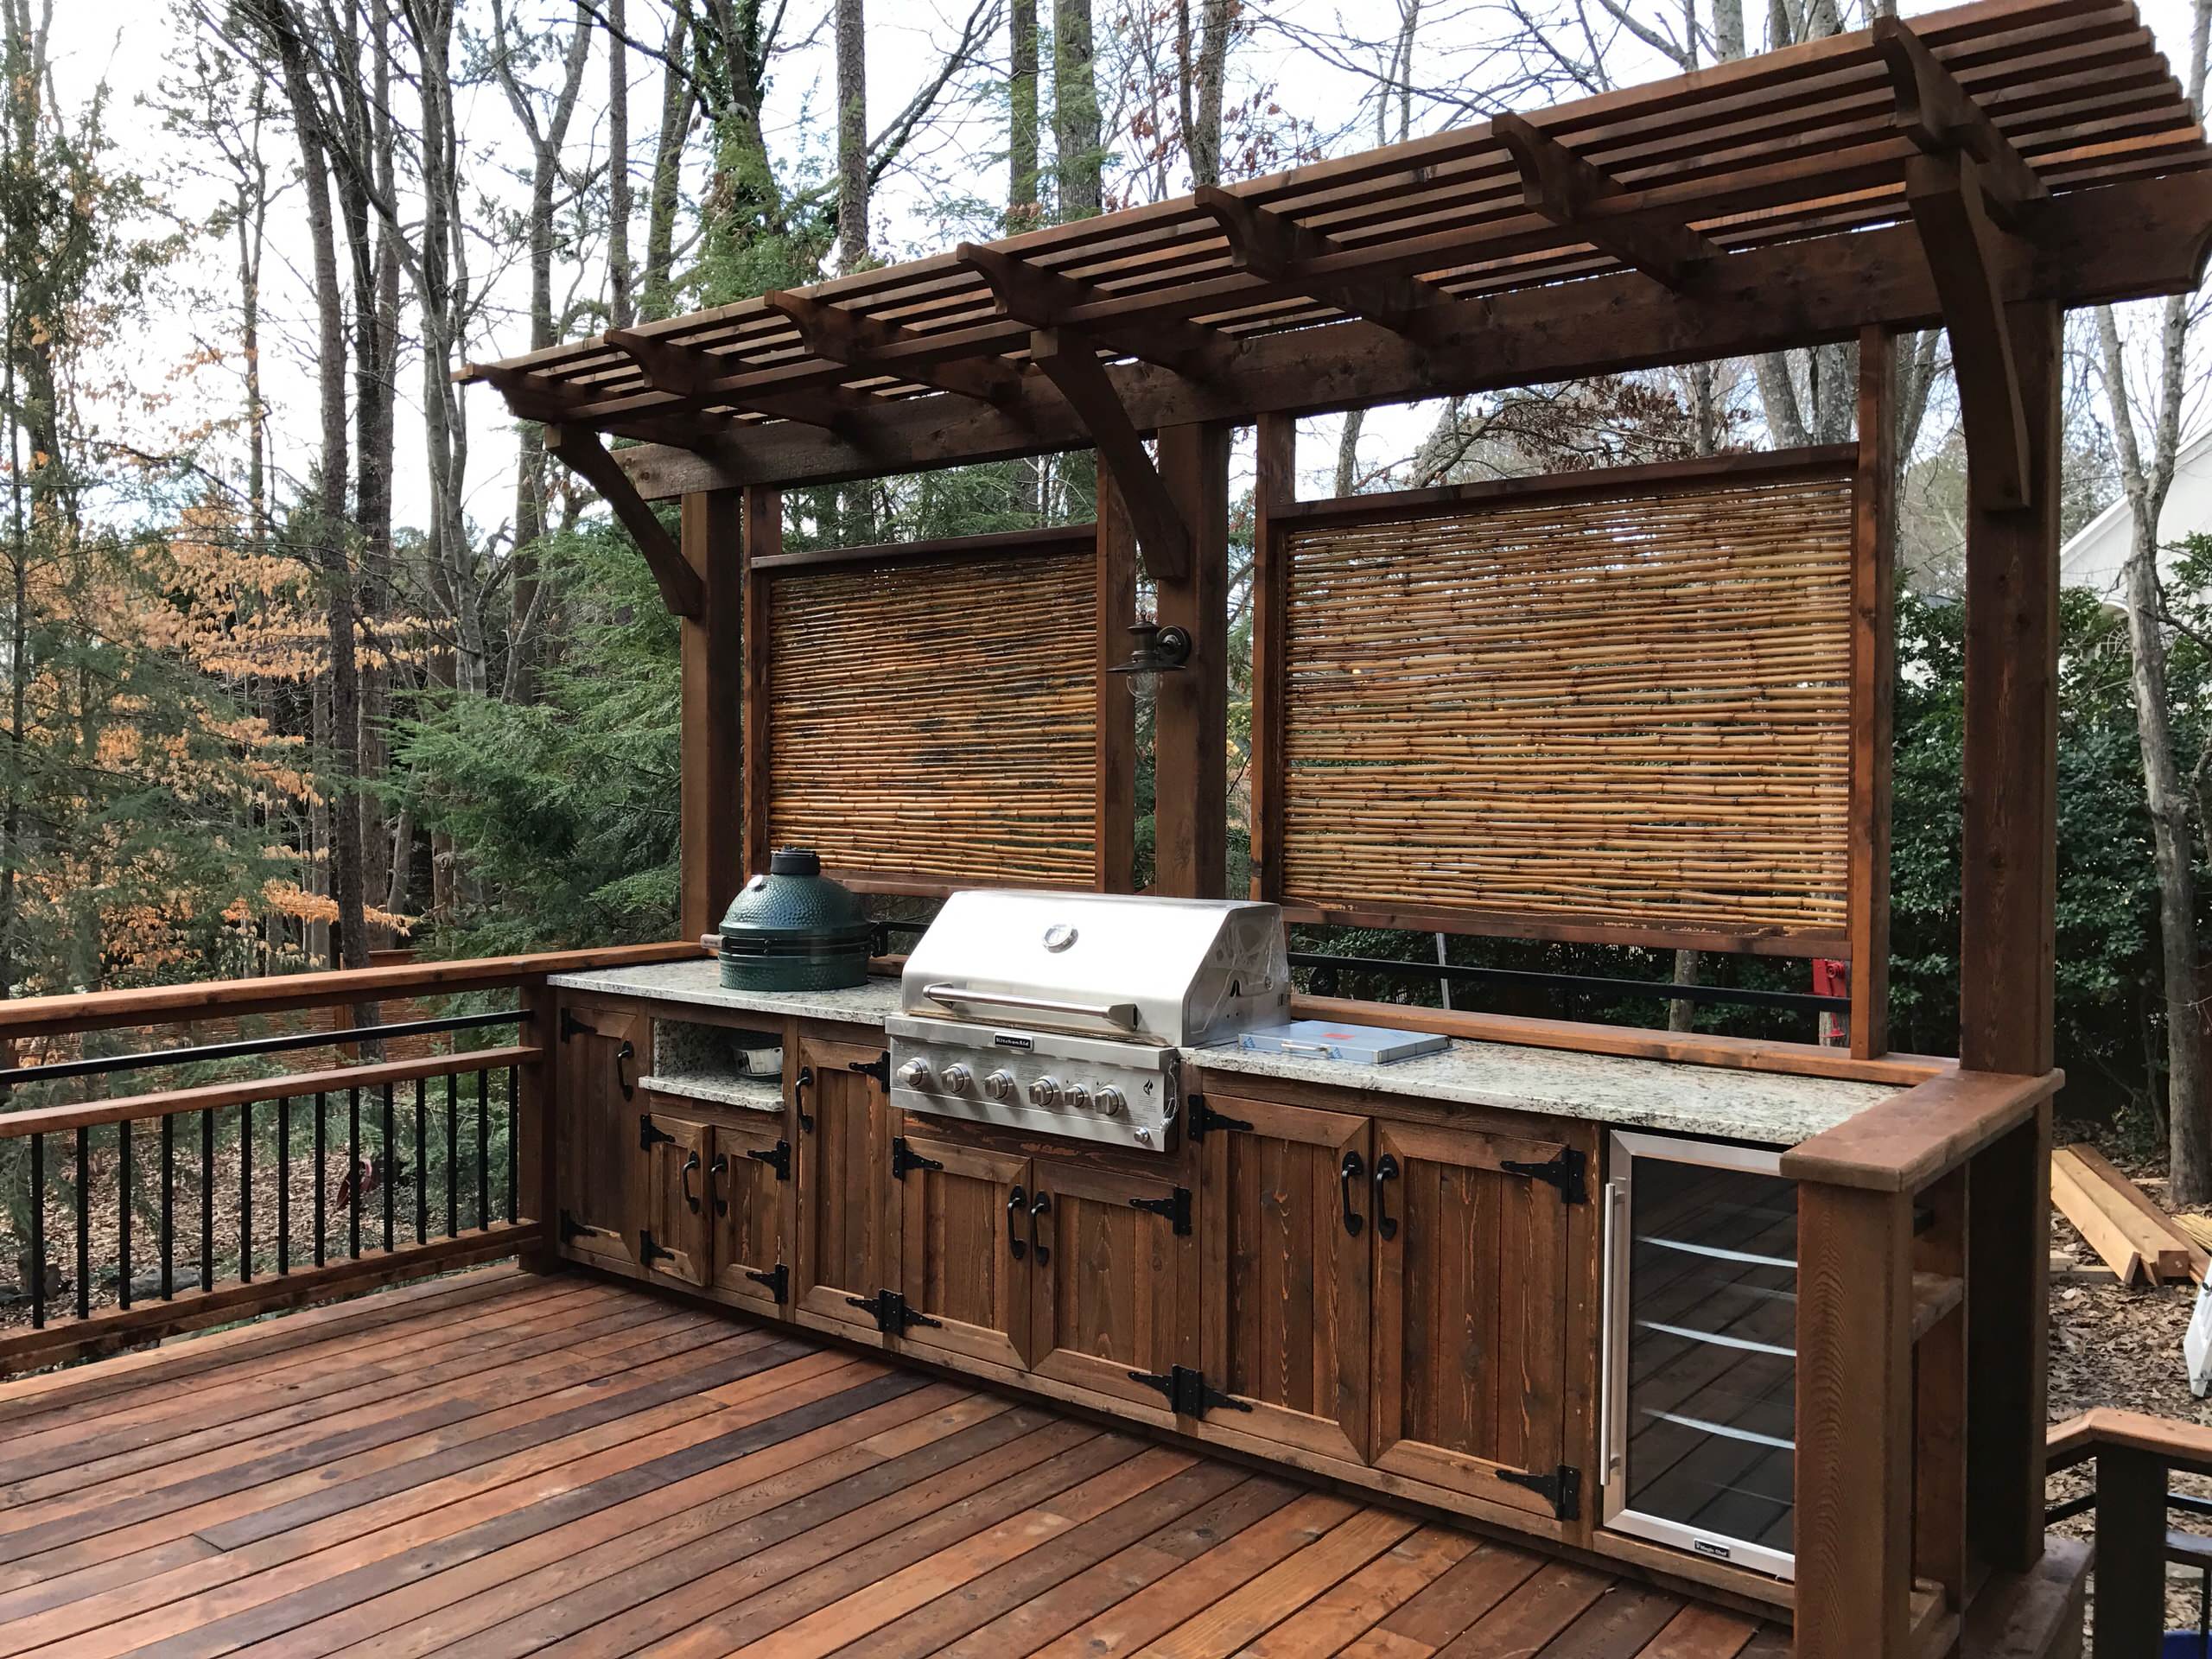 Outdoor Kitchen With Green Egg Grill - Photos & Ideas | Houzz